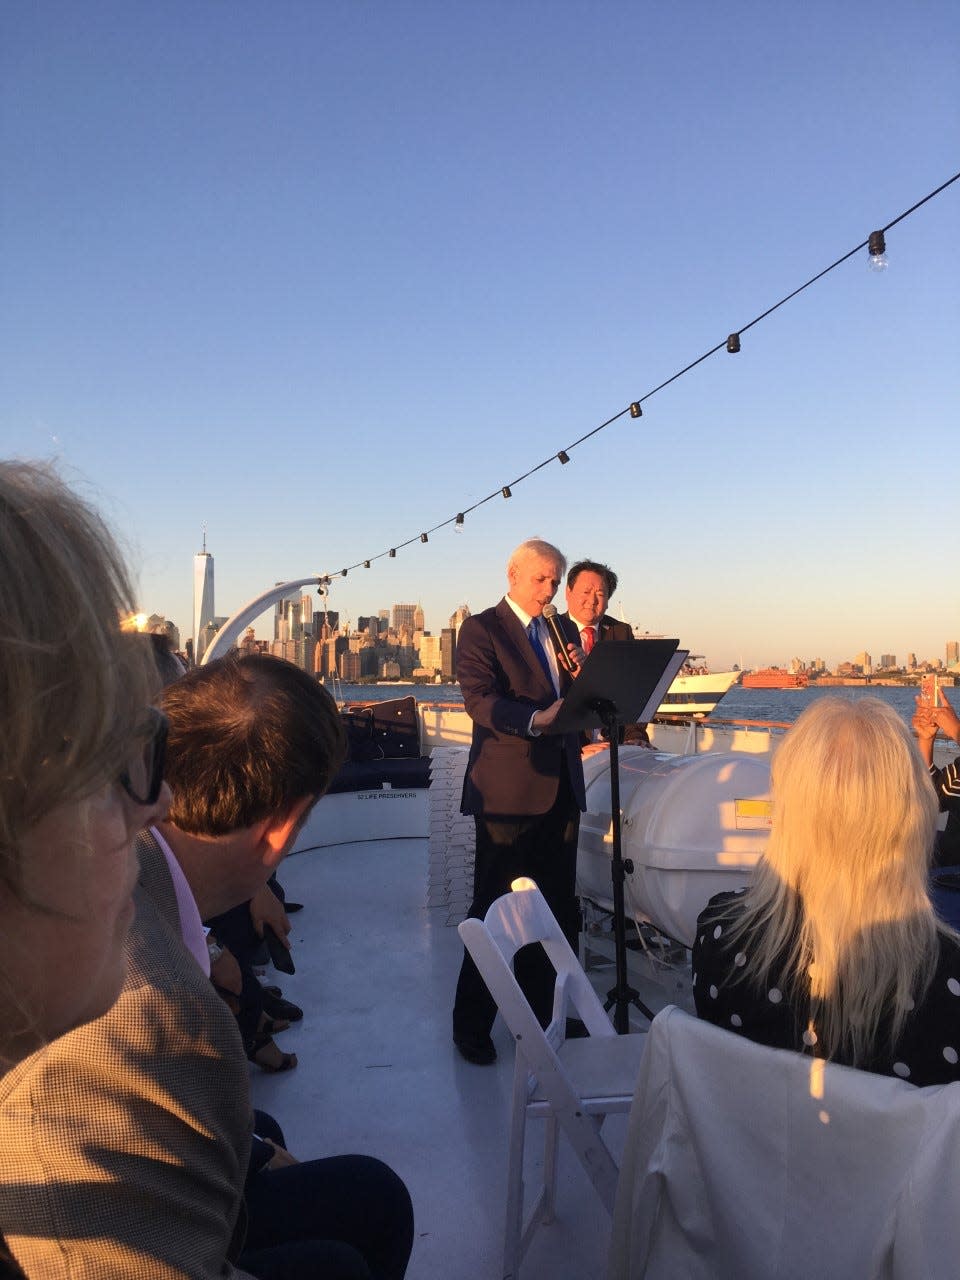 Steve Rogers speaks on the deck of the antique yacht Mariner III, which played host to a fundraiser for President Donald J. Trump in New York harbor in August.